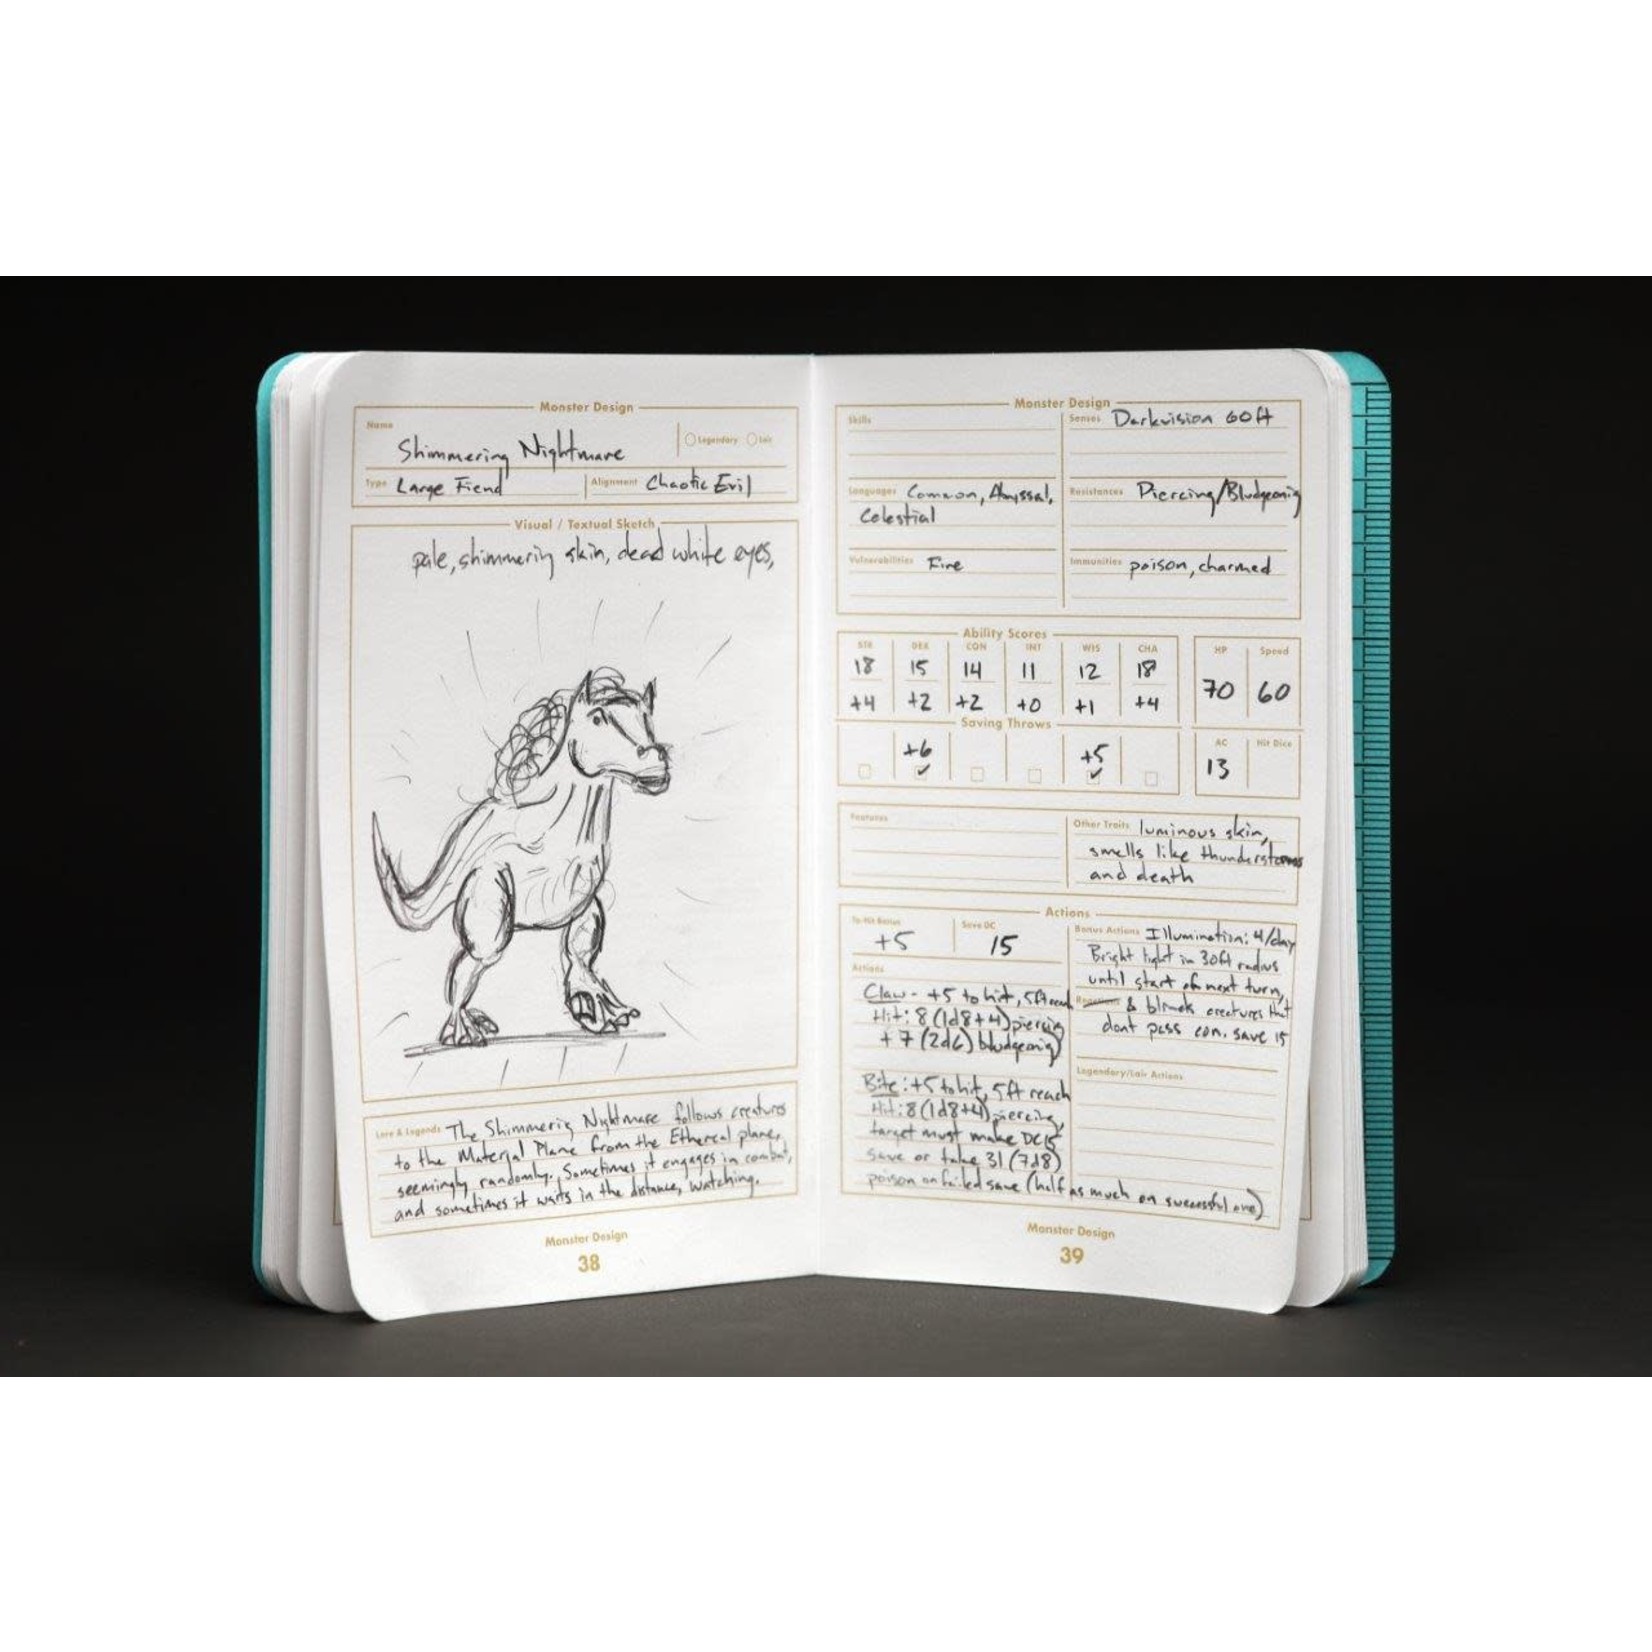 Field Notes Monster/Encounters Journals (5th Edition, Set of 2)